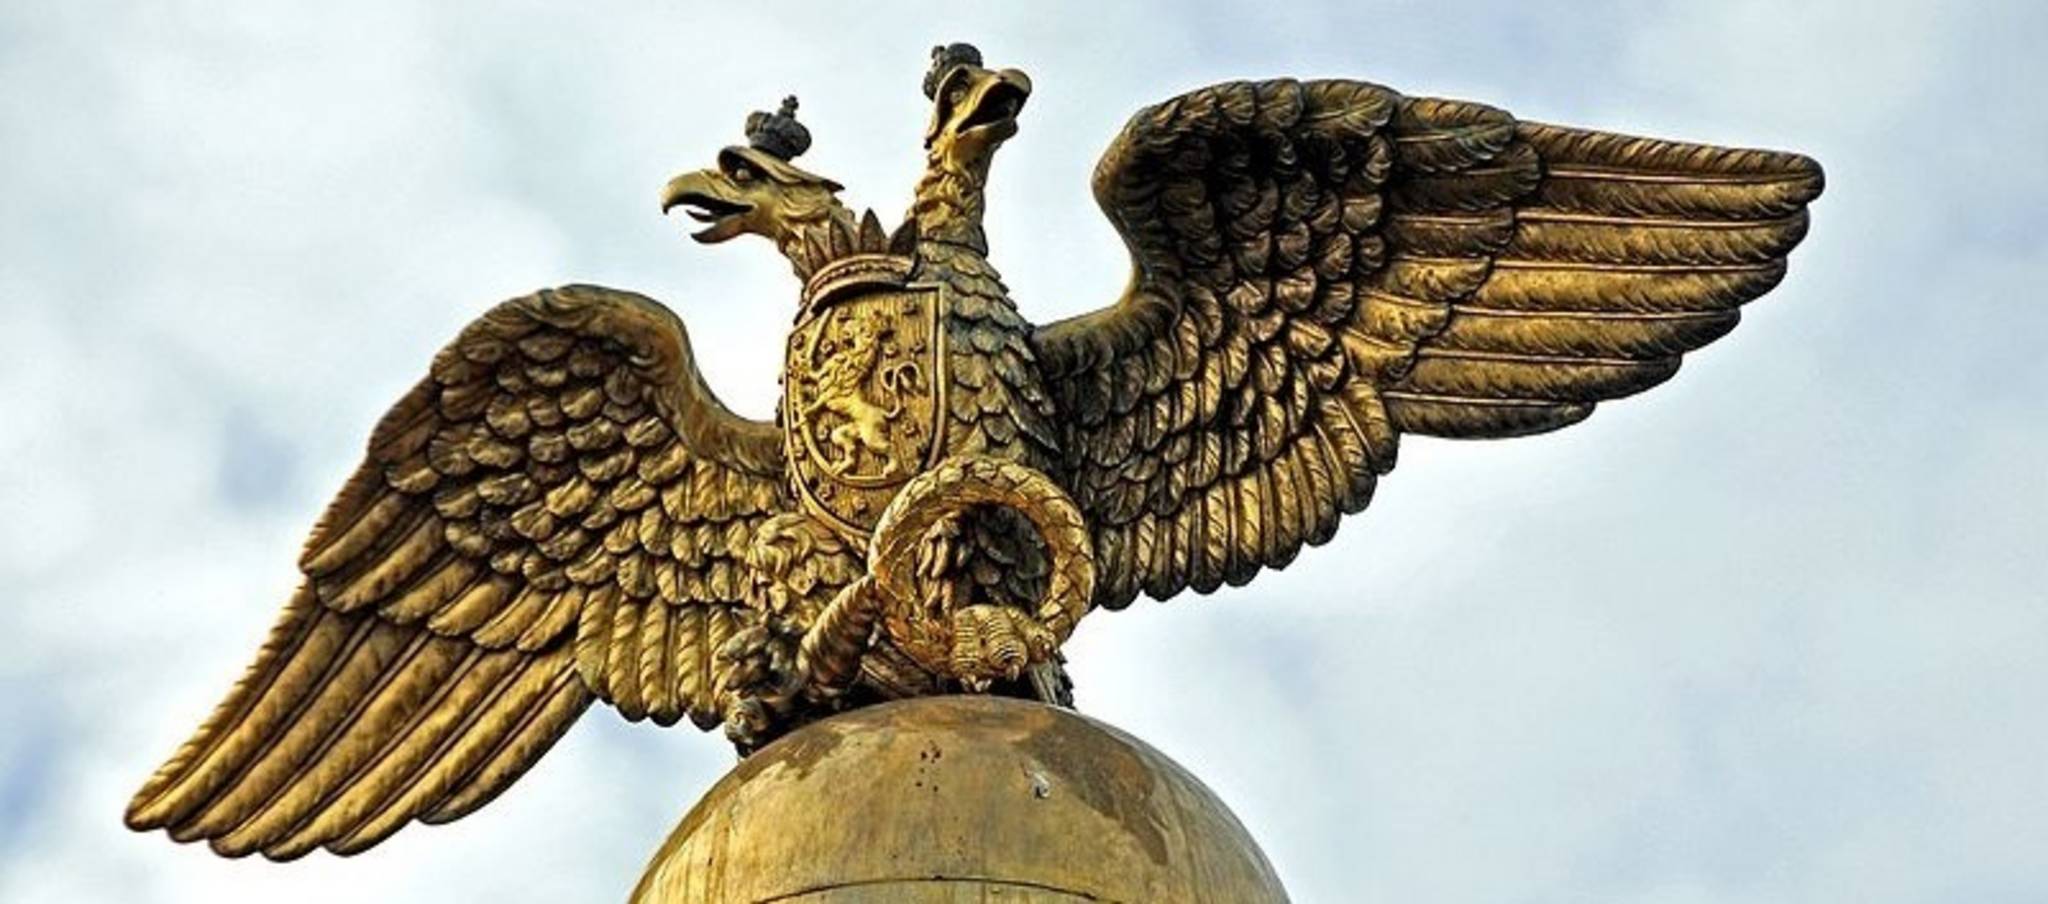 In the Market Square is Helsinki’s oldest public monument, the Tsarina’s Stone, topped by a globe and a double-headed eagle, the emblem used by the Tsars of Russia.